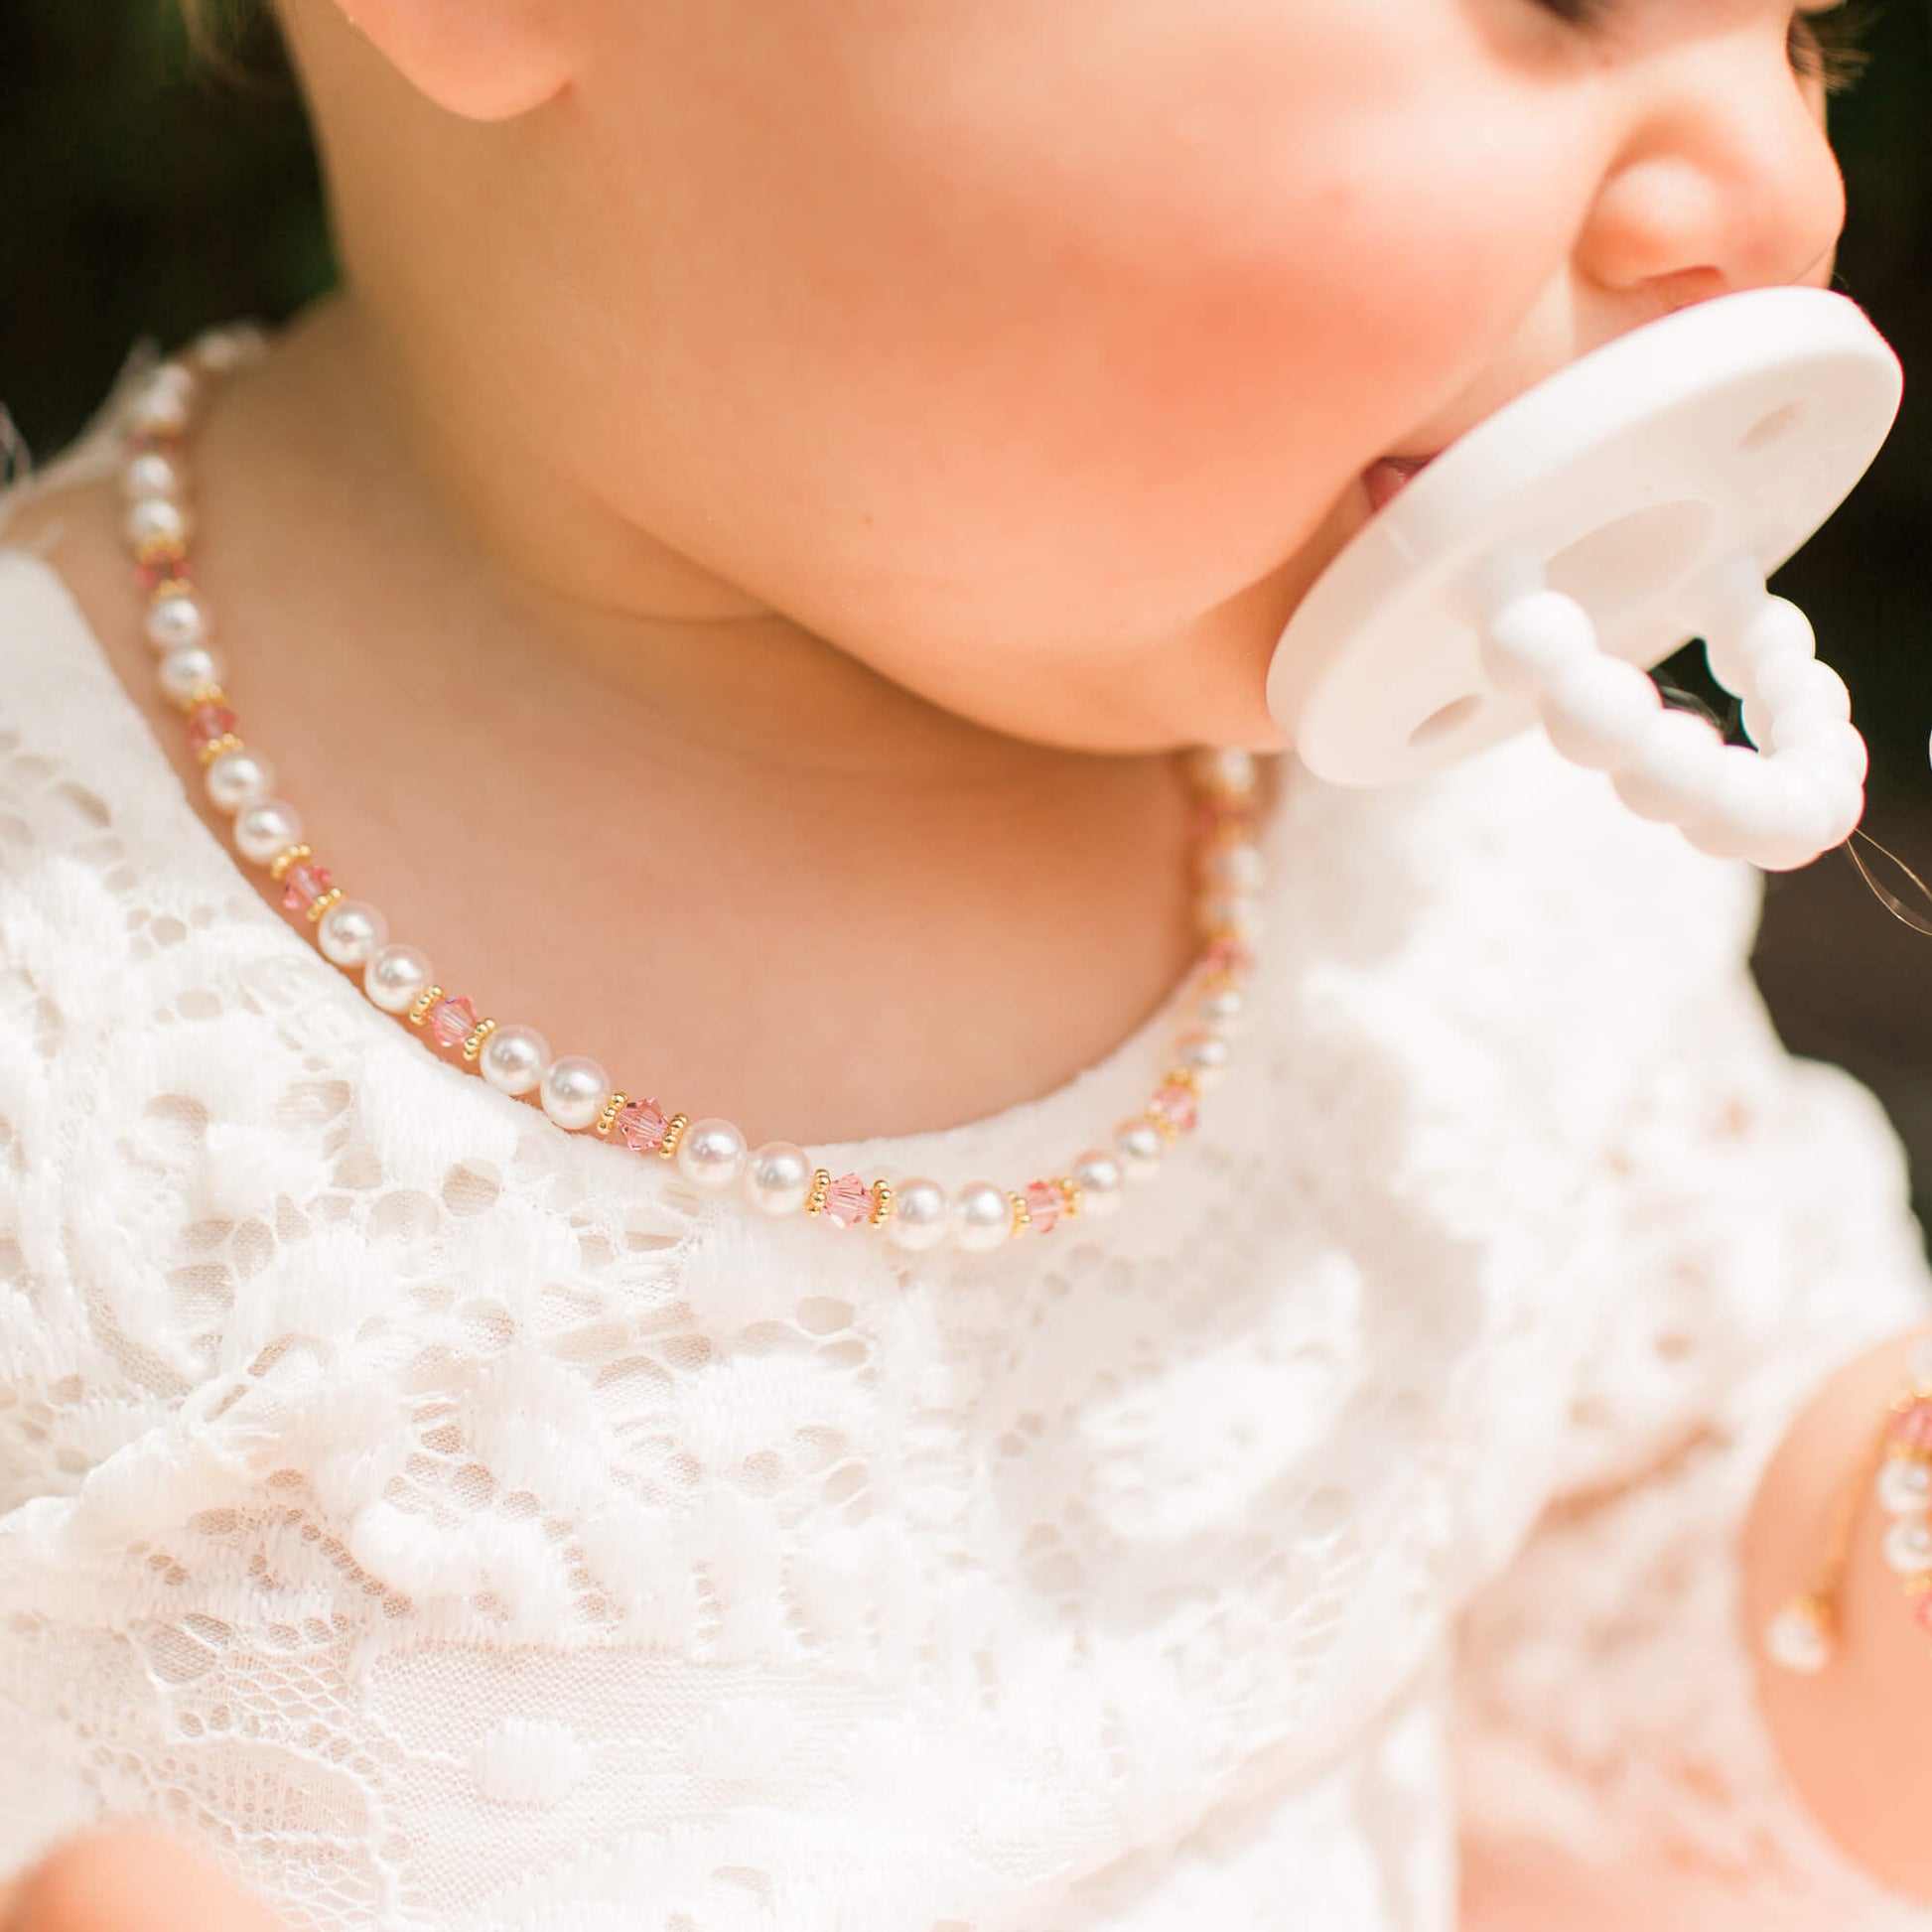 baby girl in a darling pearl and crystal necklace from little girl's pearls wearing a lace dress.